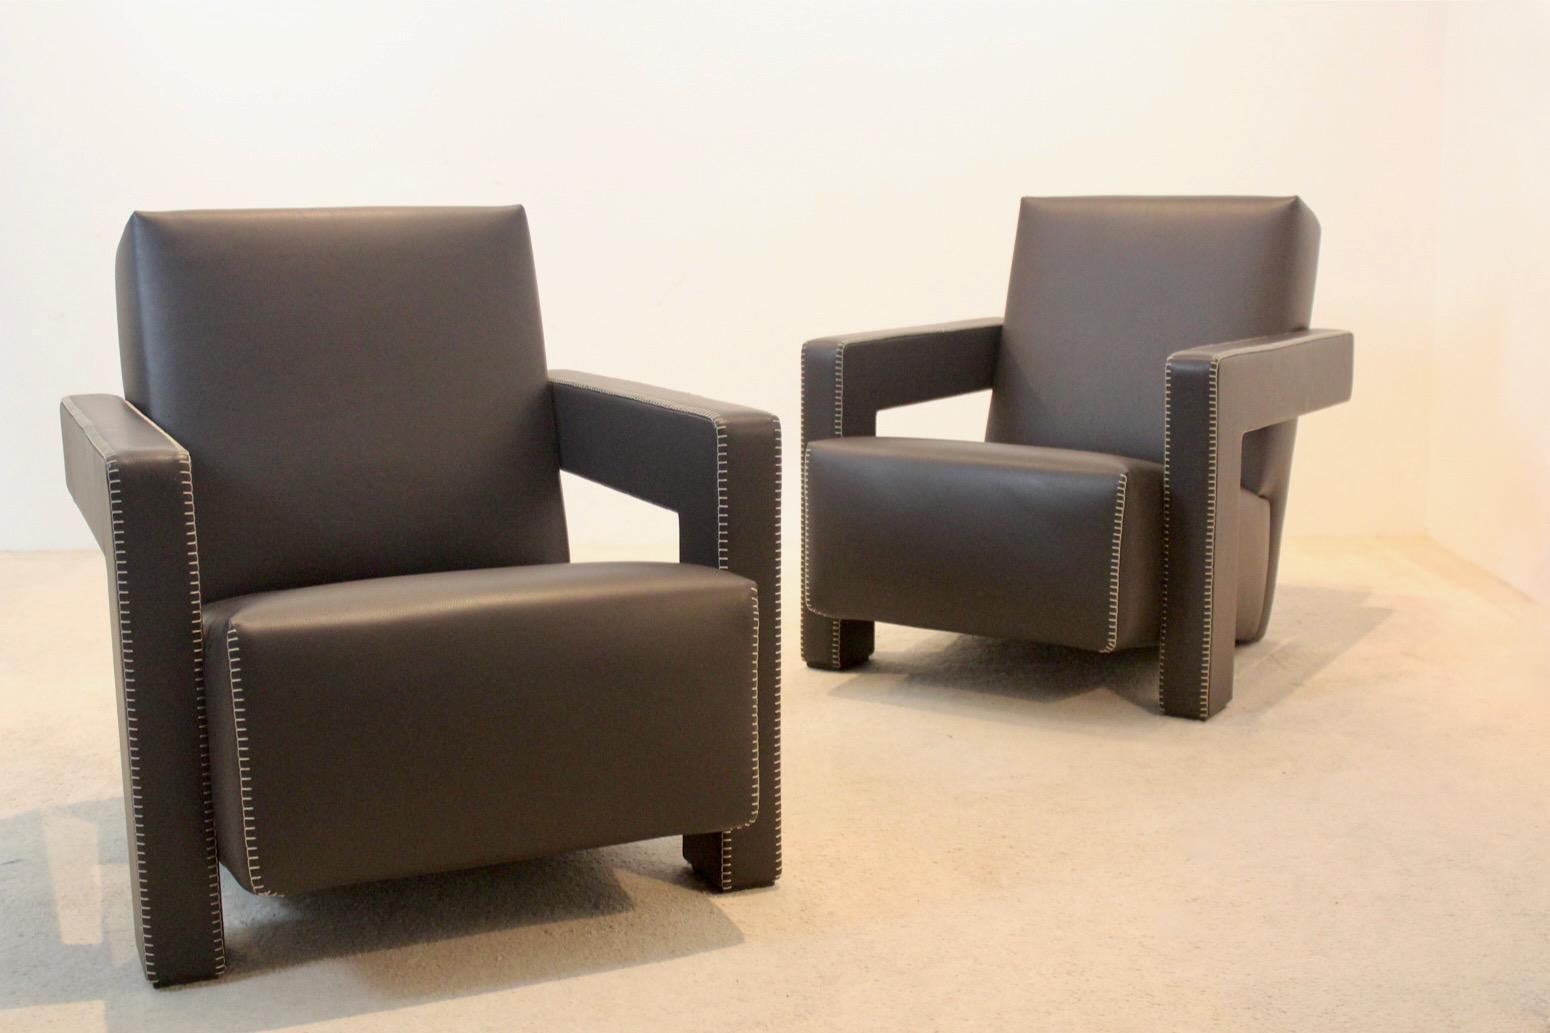 Gerrit Rietveld Chocolate Brown Leather Utrecht armchairs in fantastic condition. Rietveld, Dutch architect with a strong bent for experimentation, and one of the founders, with Mondrian, of the neo-plastic ‘de Stijl’ movement in 1917. Rietveld